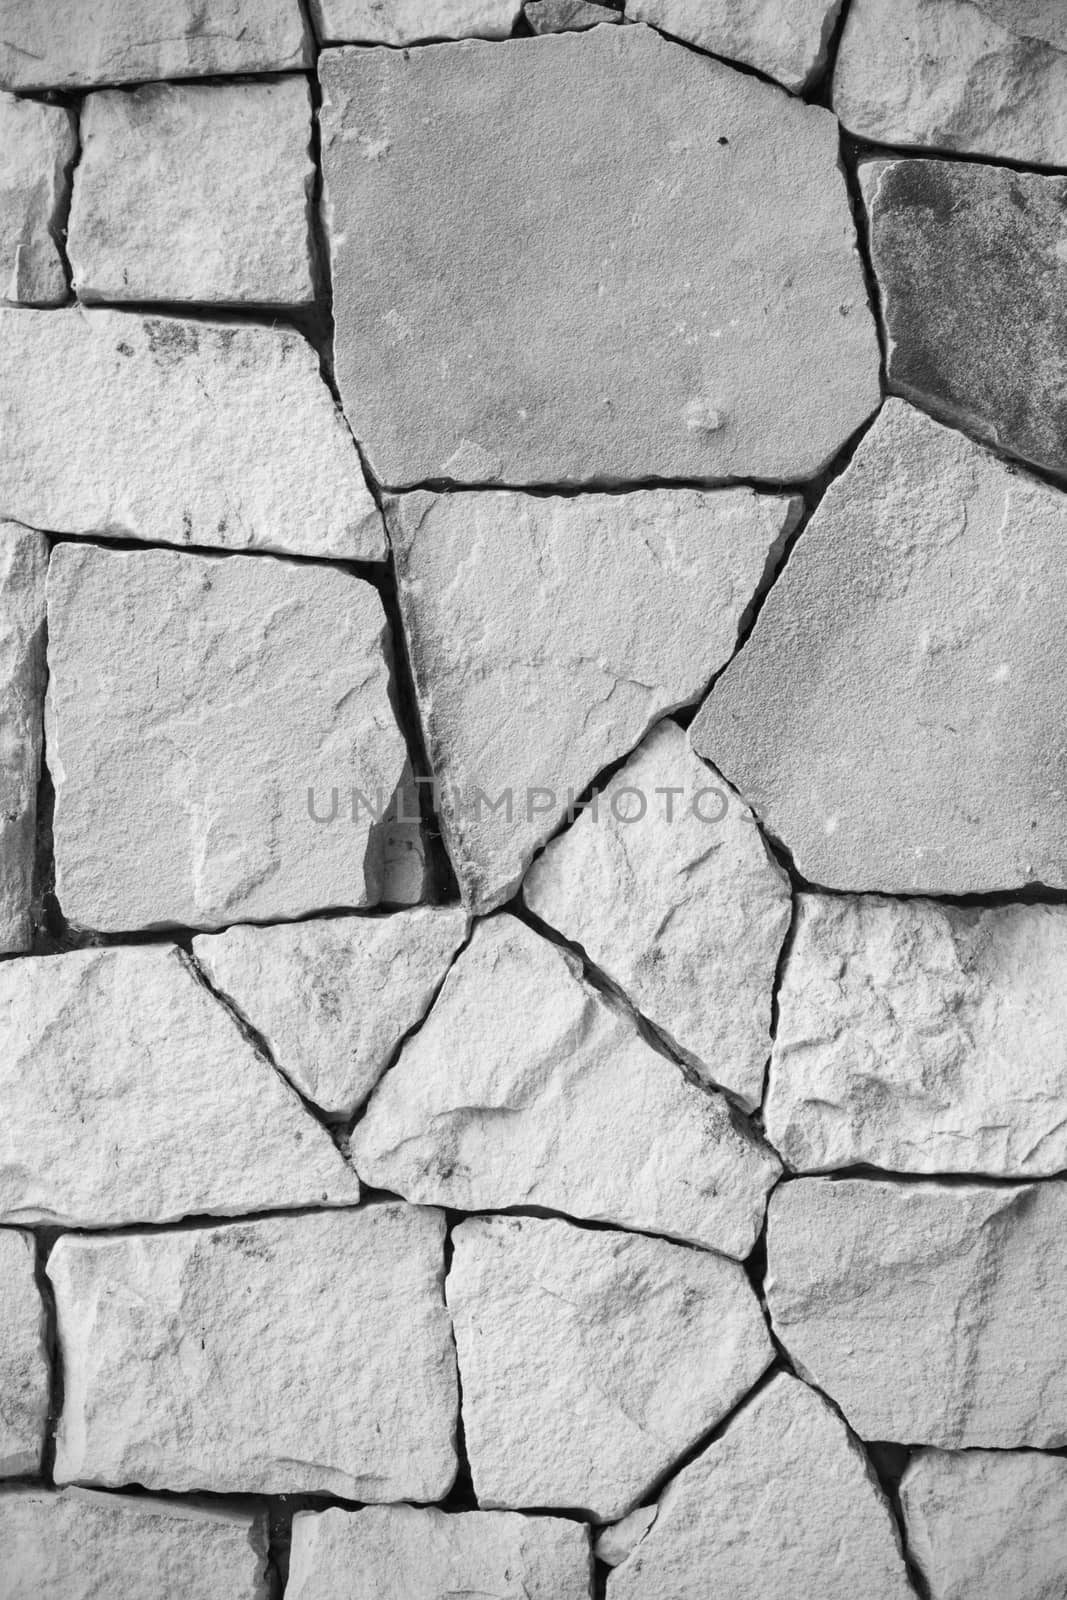 black and white and multi-sized, pale rocks wall grunge texture background.